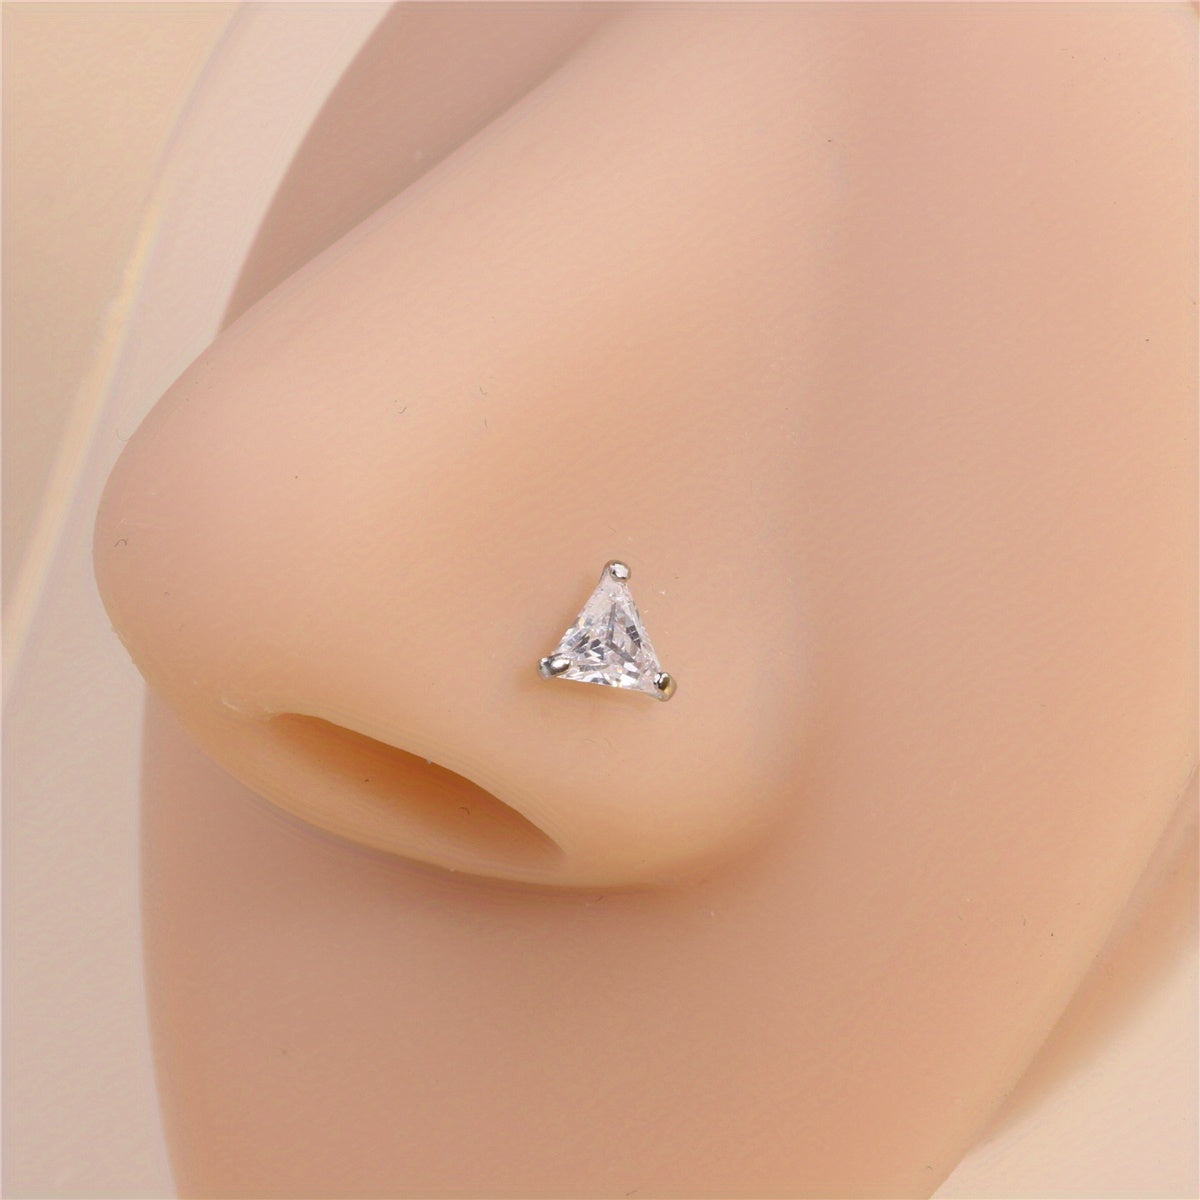 Inlaid Cubic Zirconia L Shape Nose Ring Studs For Women Body Piercing Jewelry